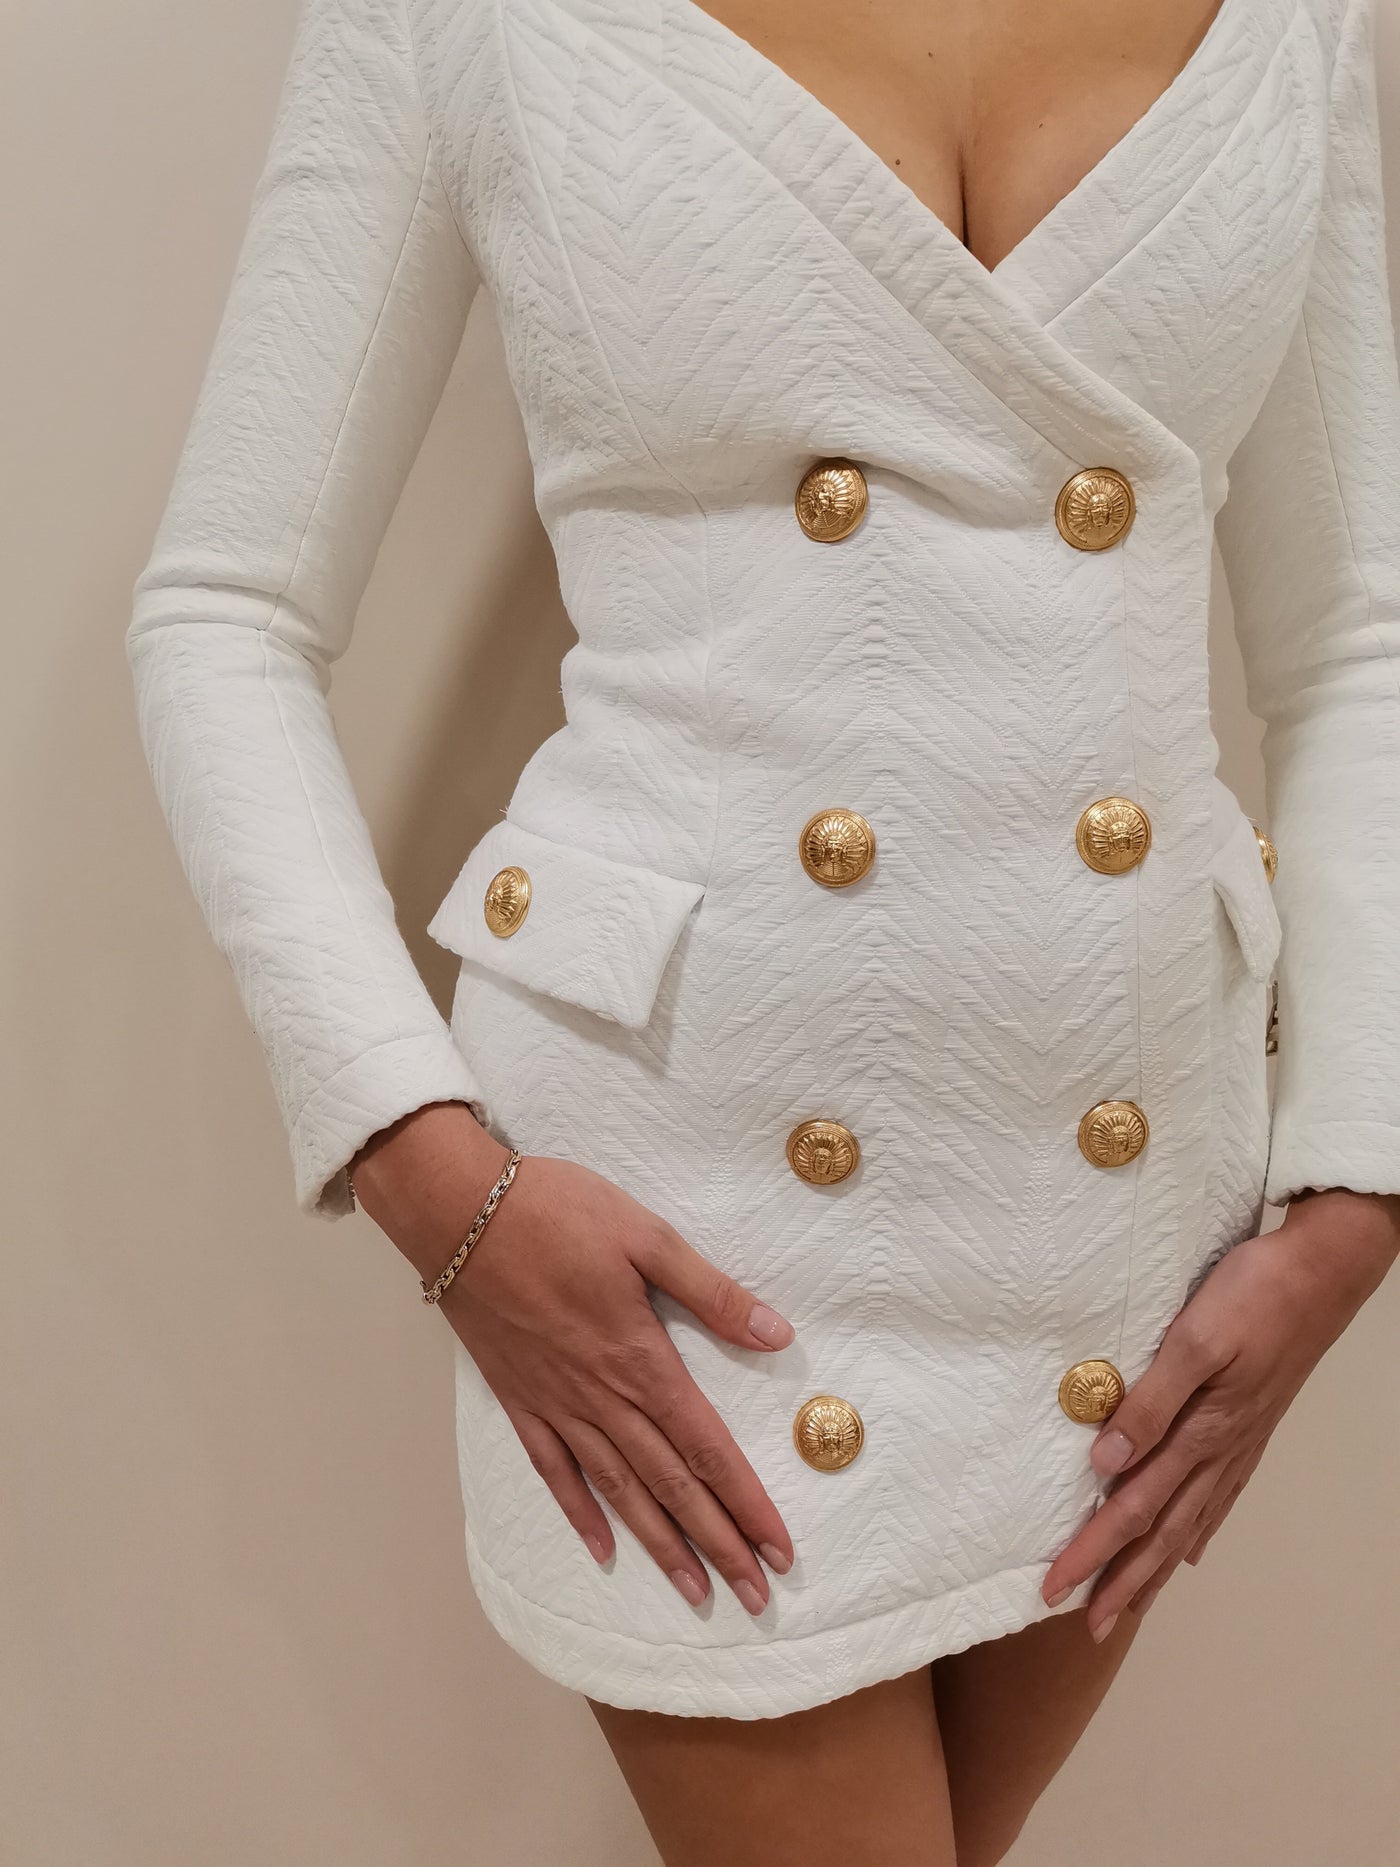 BALMAIN blazer dress with gold buttons brand new with tag and cover